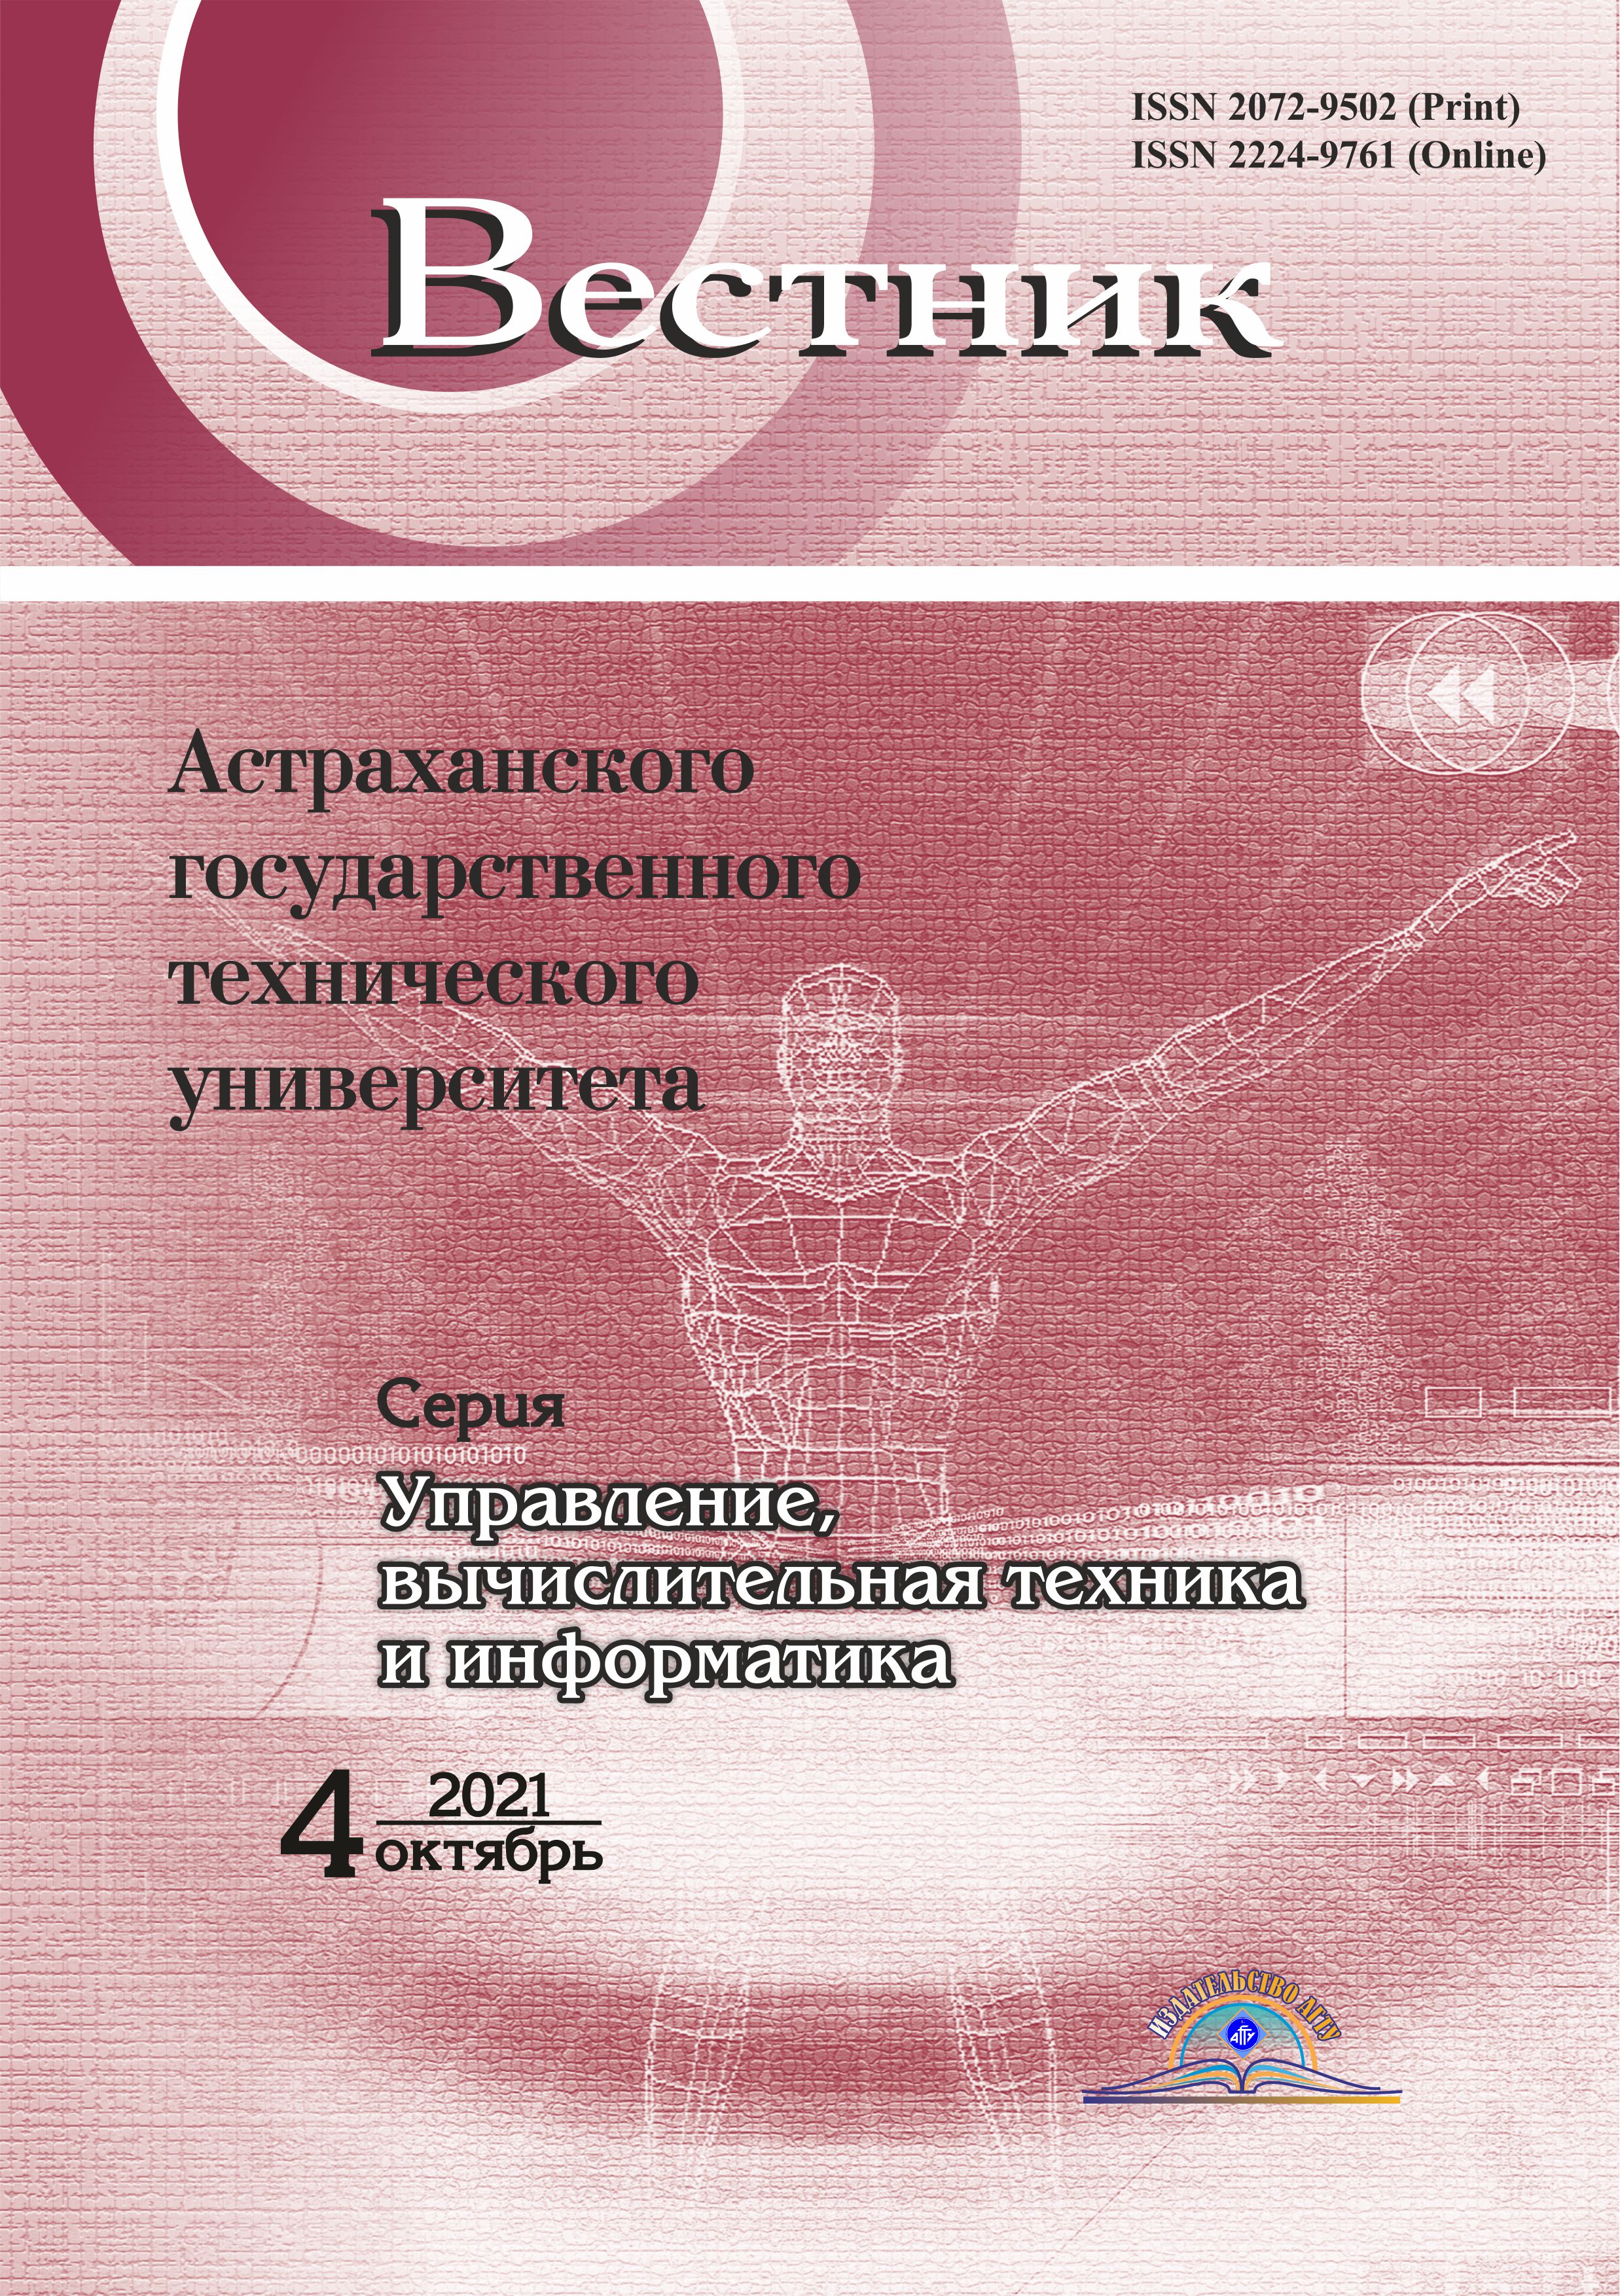                         FORMALIZATION OF CONTROL SYSTEMS FOR PROCESS OF TRAINING FOREIGN STUDENTS IN UNIVERSITIES OF RUSSIAN FEDERATION
            